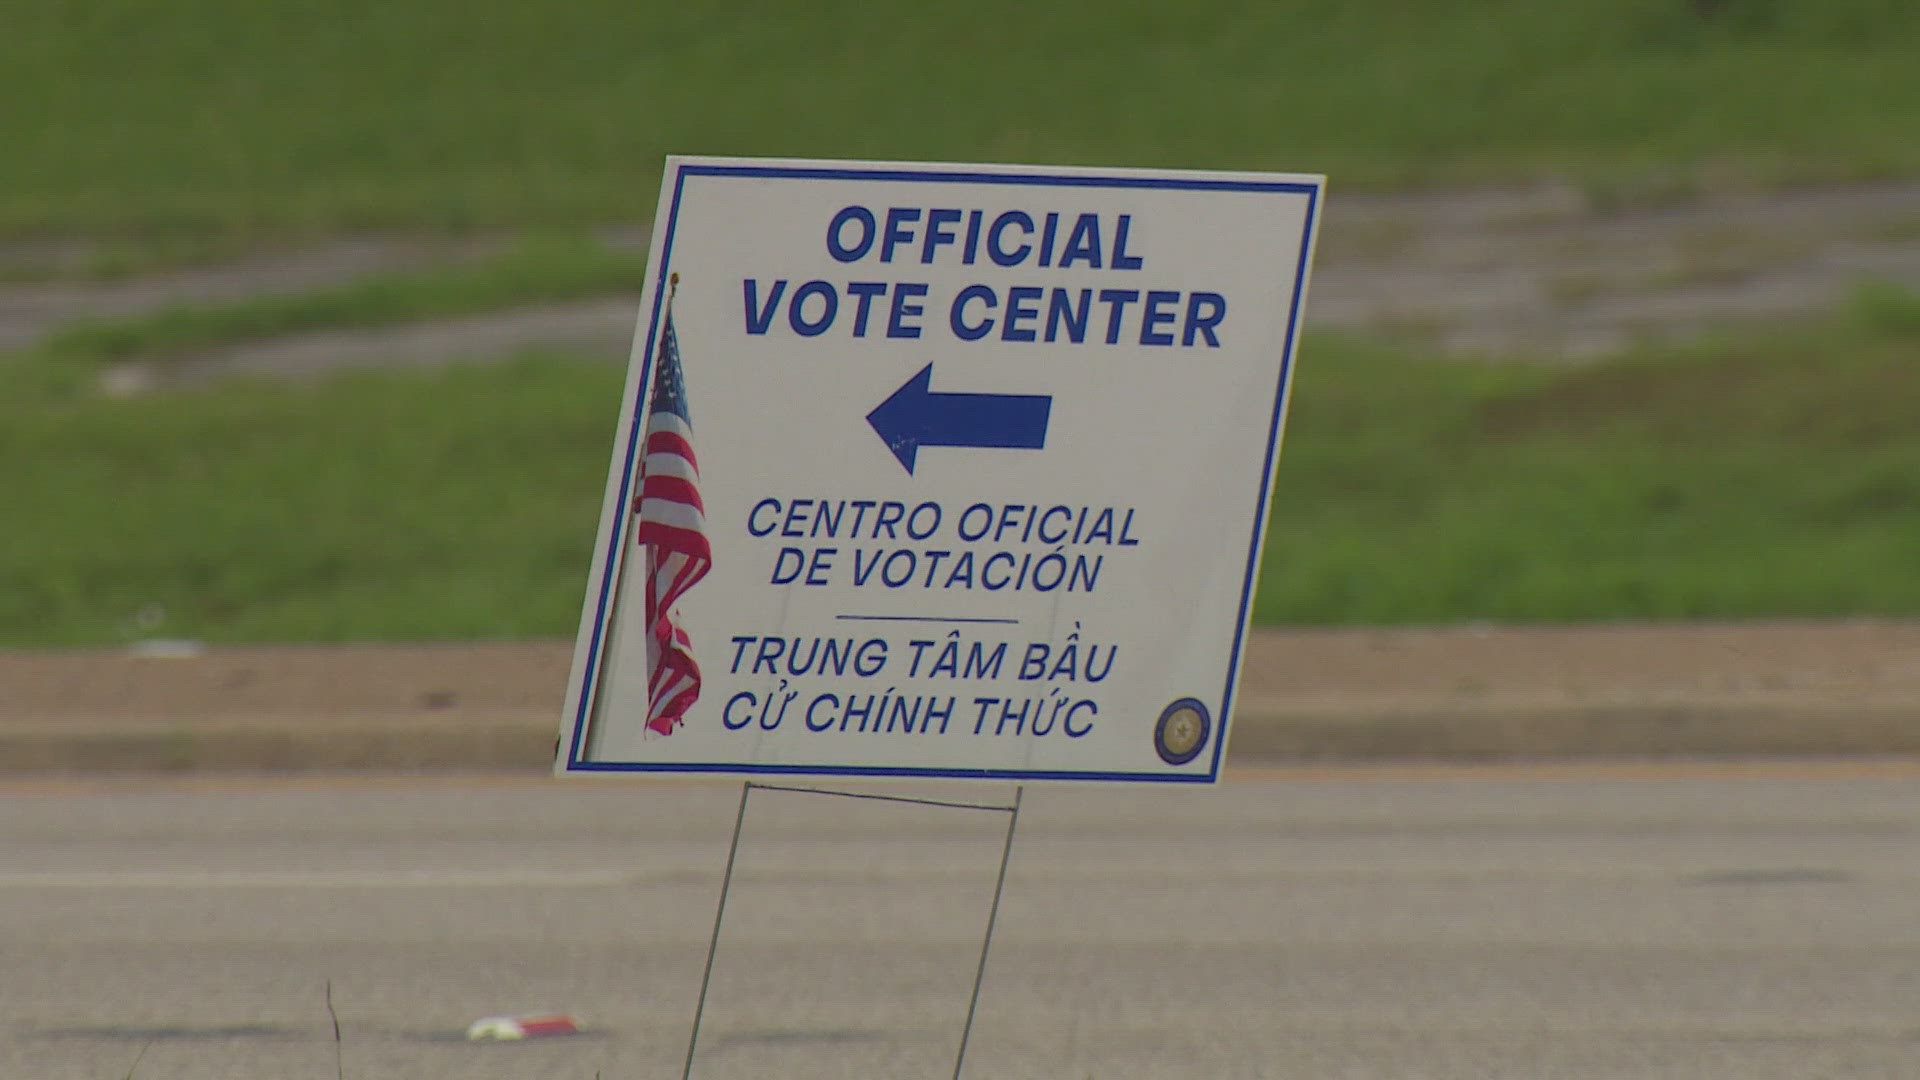 Some Tarrant County residents said they had to wait over an hour to cast their ballots.